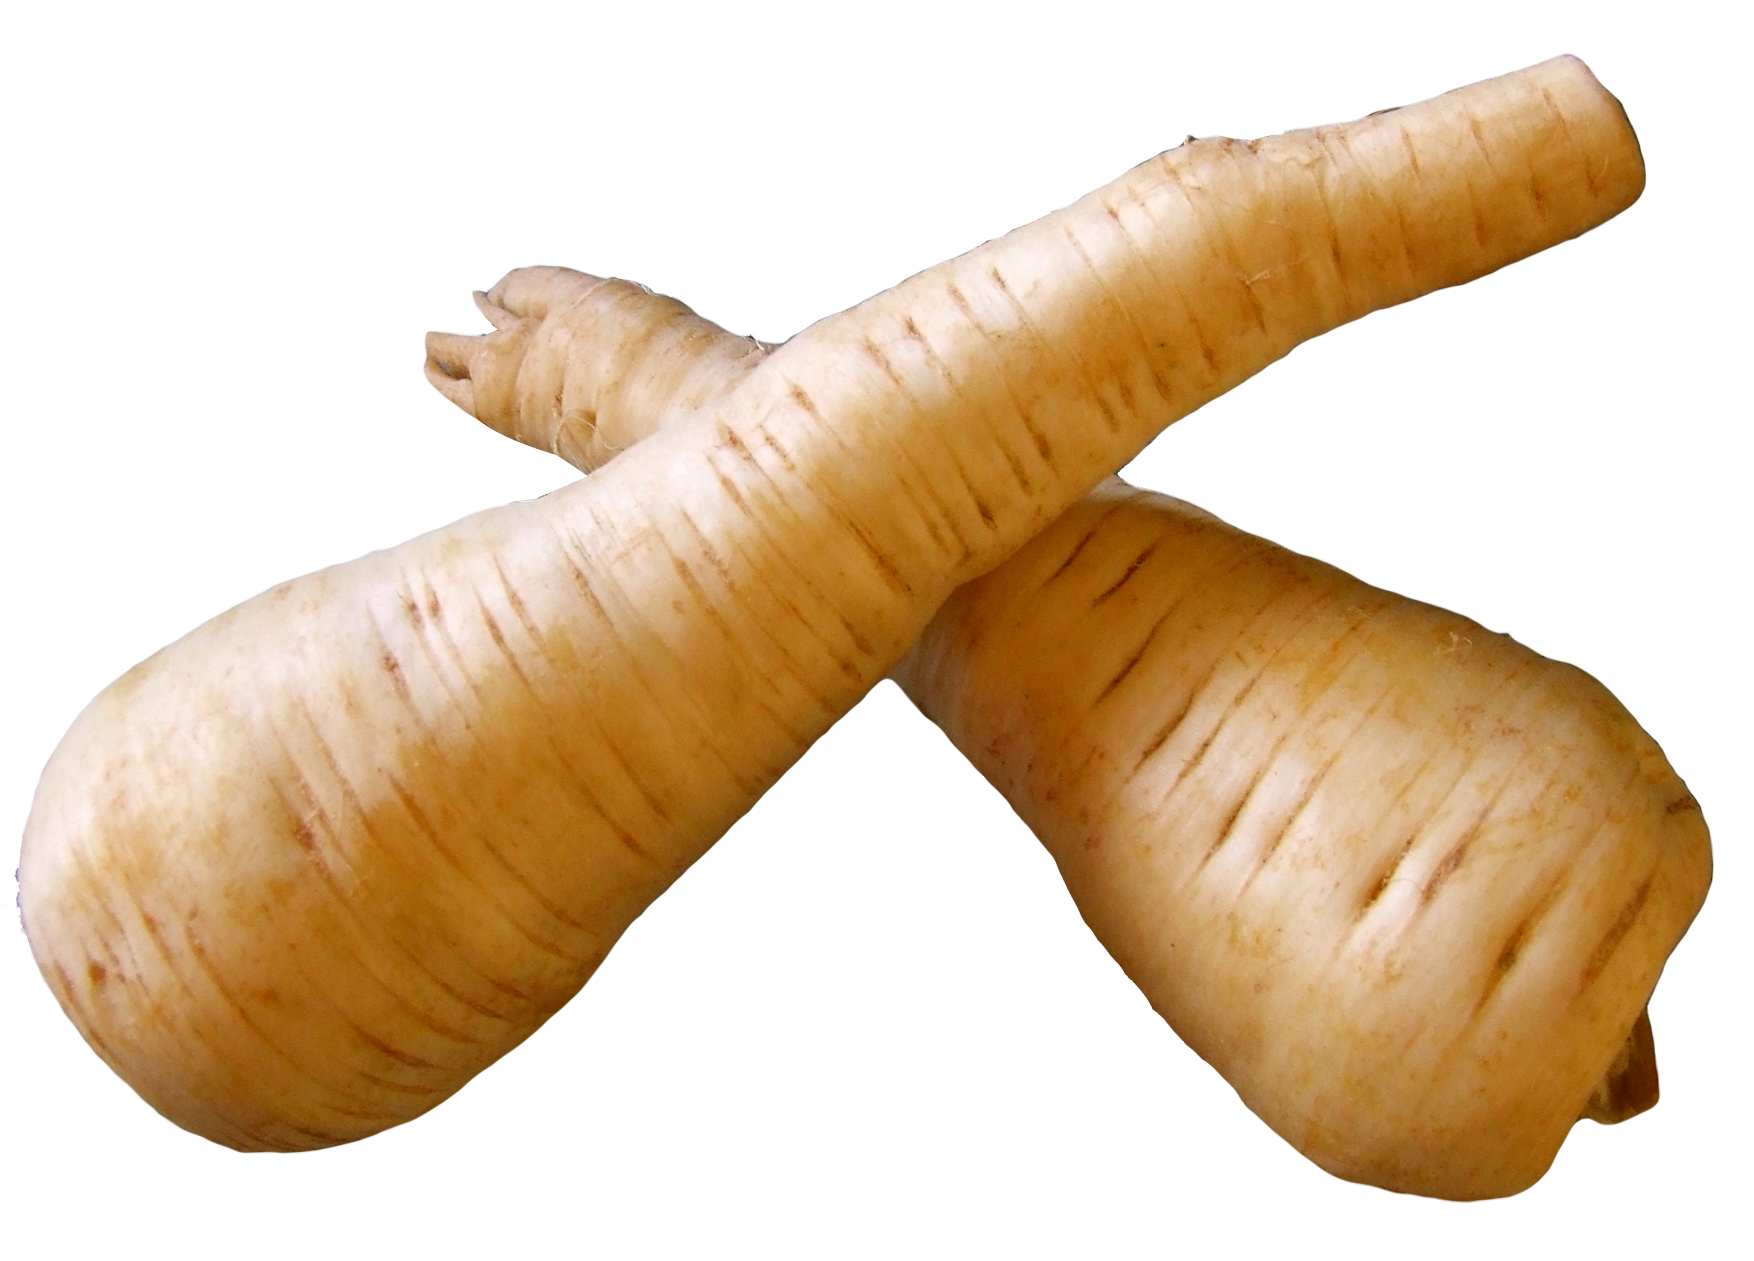 A Pair Of Parsnips On A Black Background